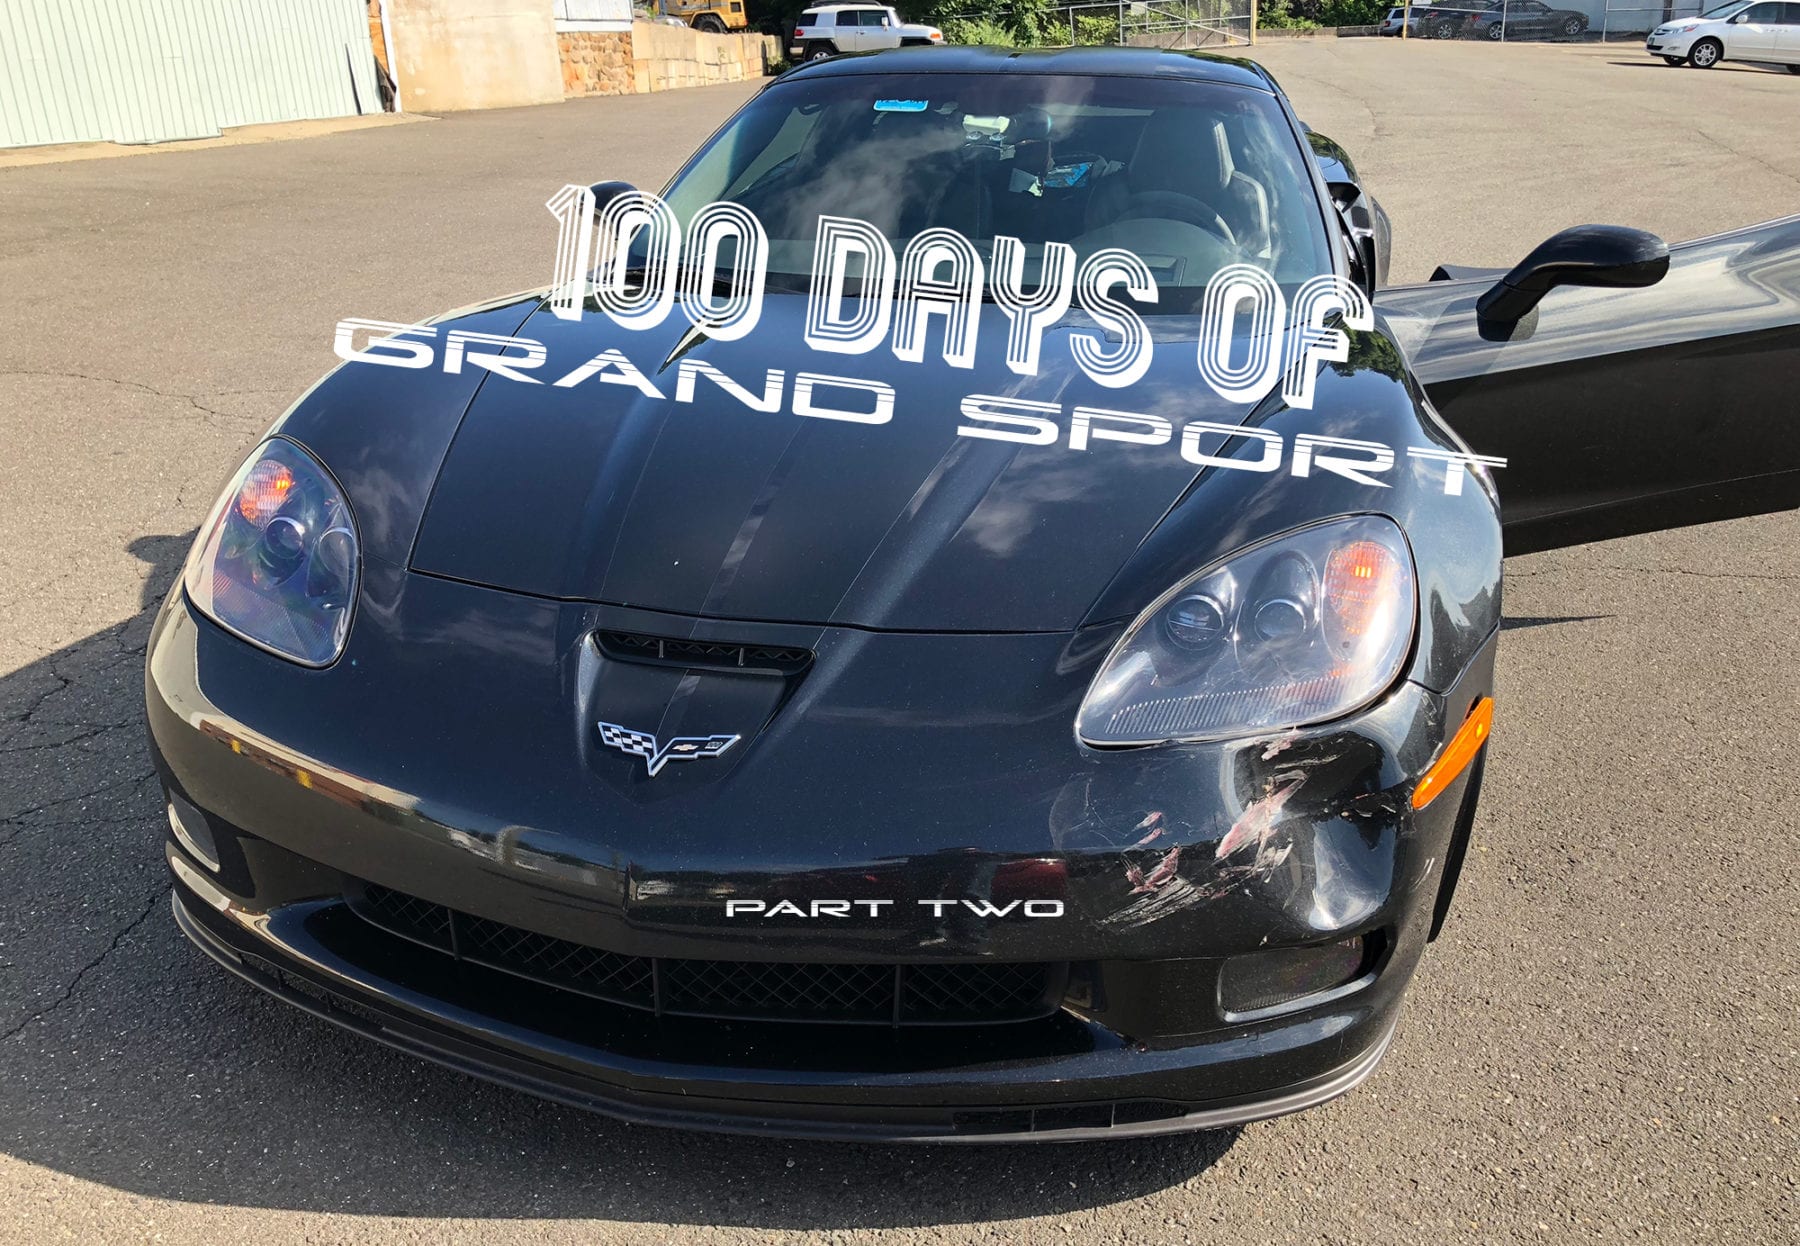 100 days of Grand Sport part 2